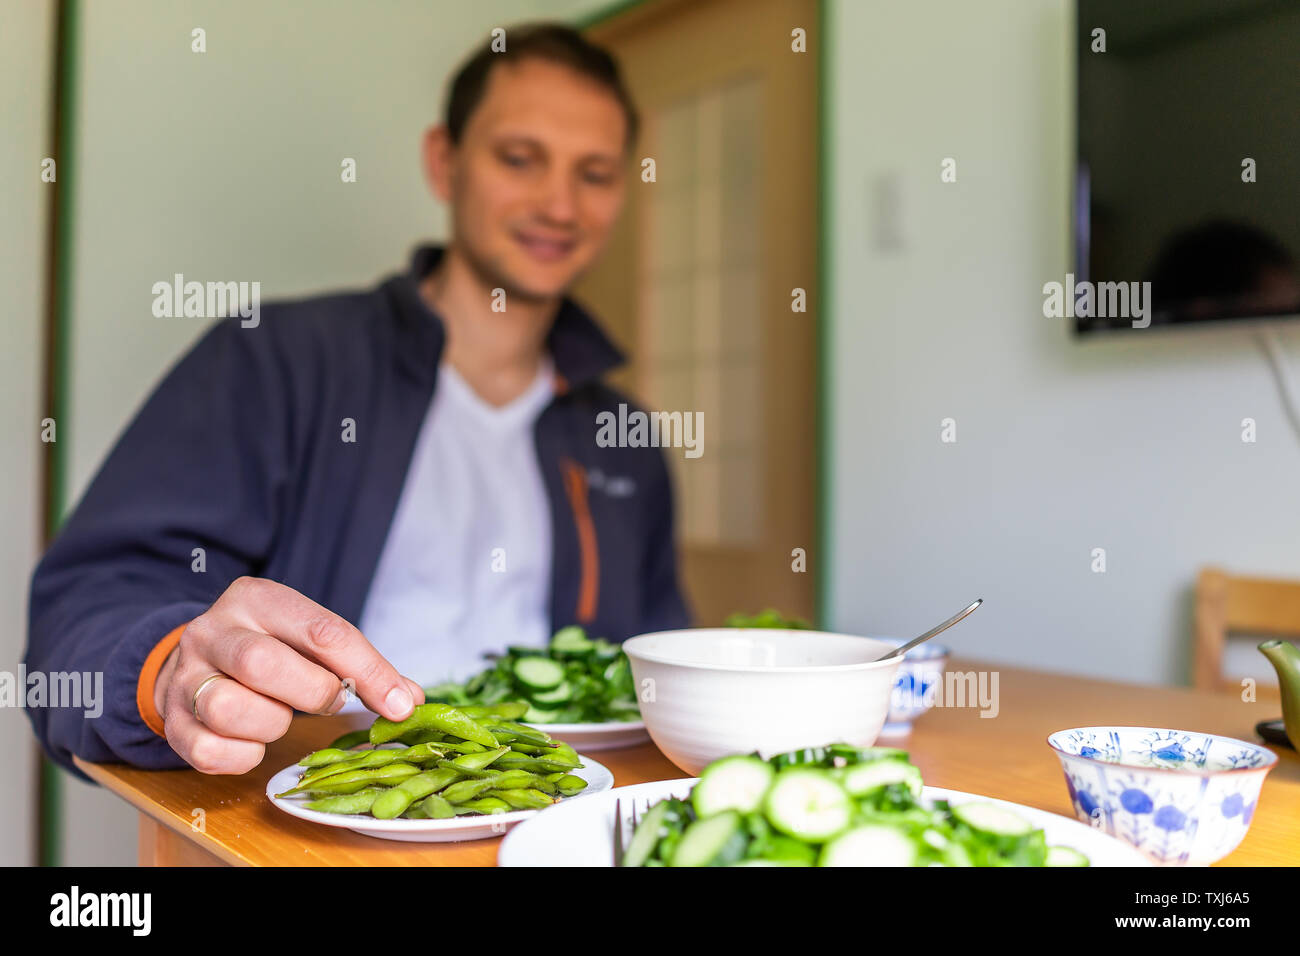 Home with table and green salad dish with Japanese cucumbers and mizuna greens and man trying boiled edamame soy beans Stock Photo